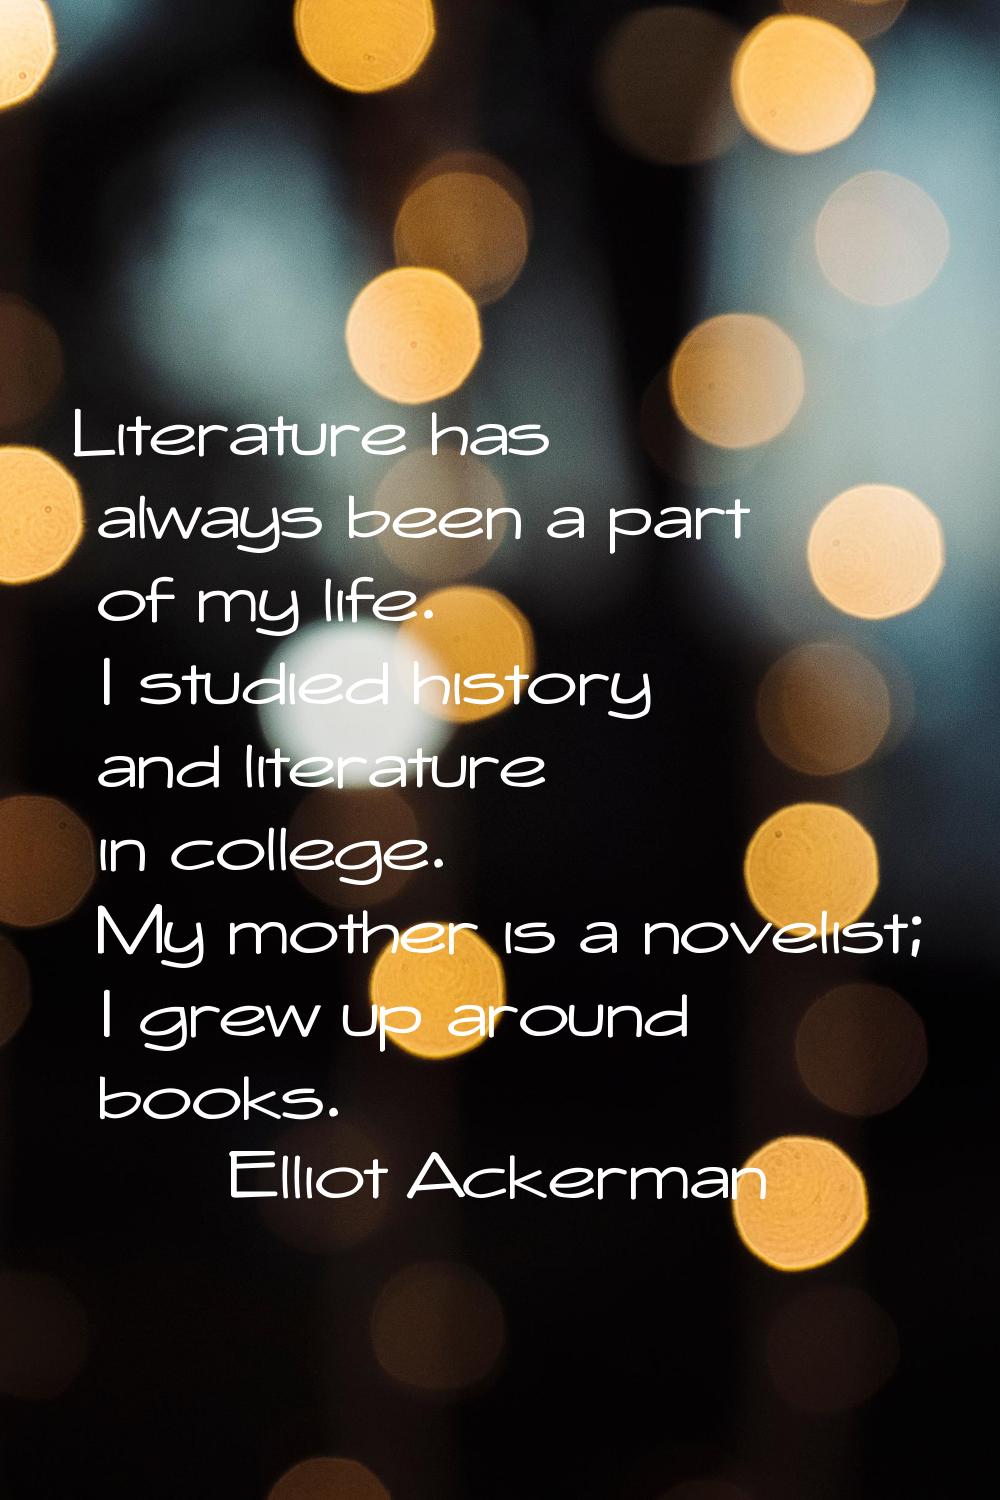 Literature has always been a part of my life. I studied history and literature in college. My mothe